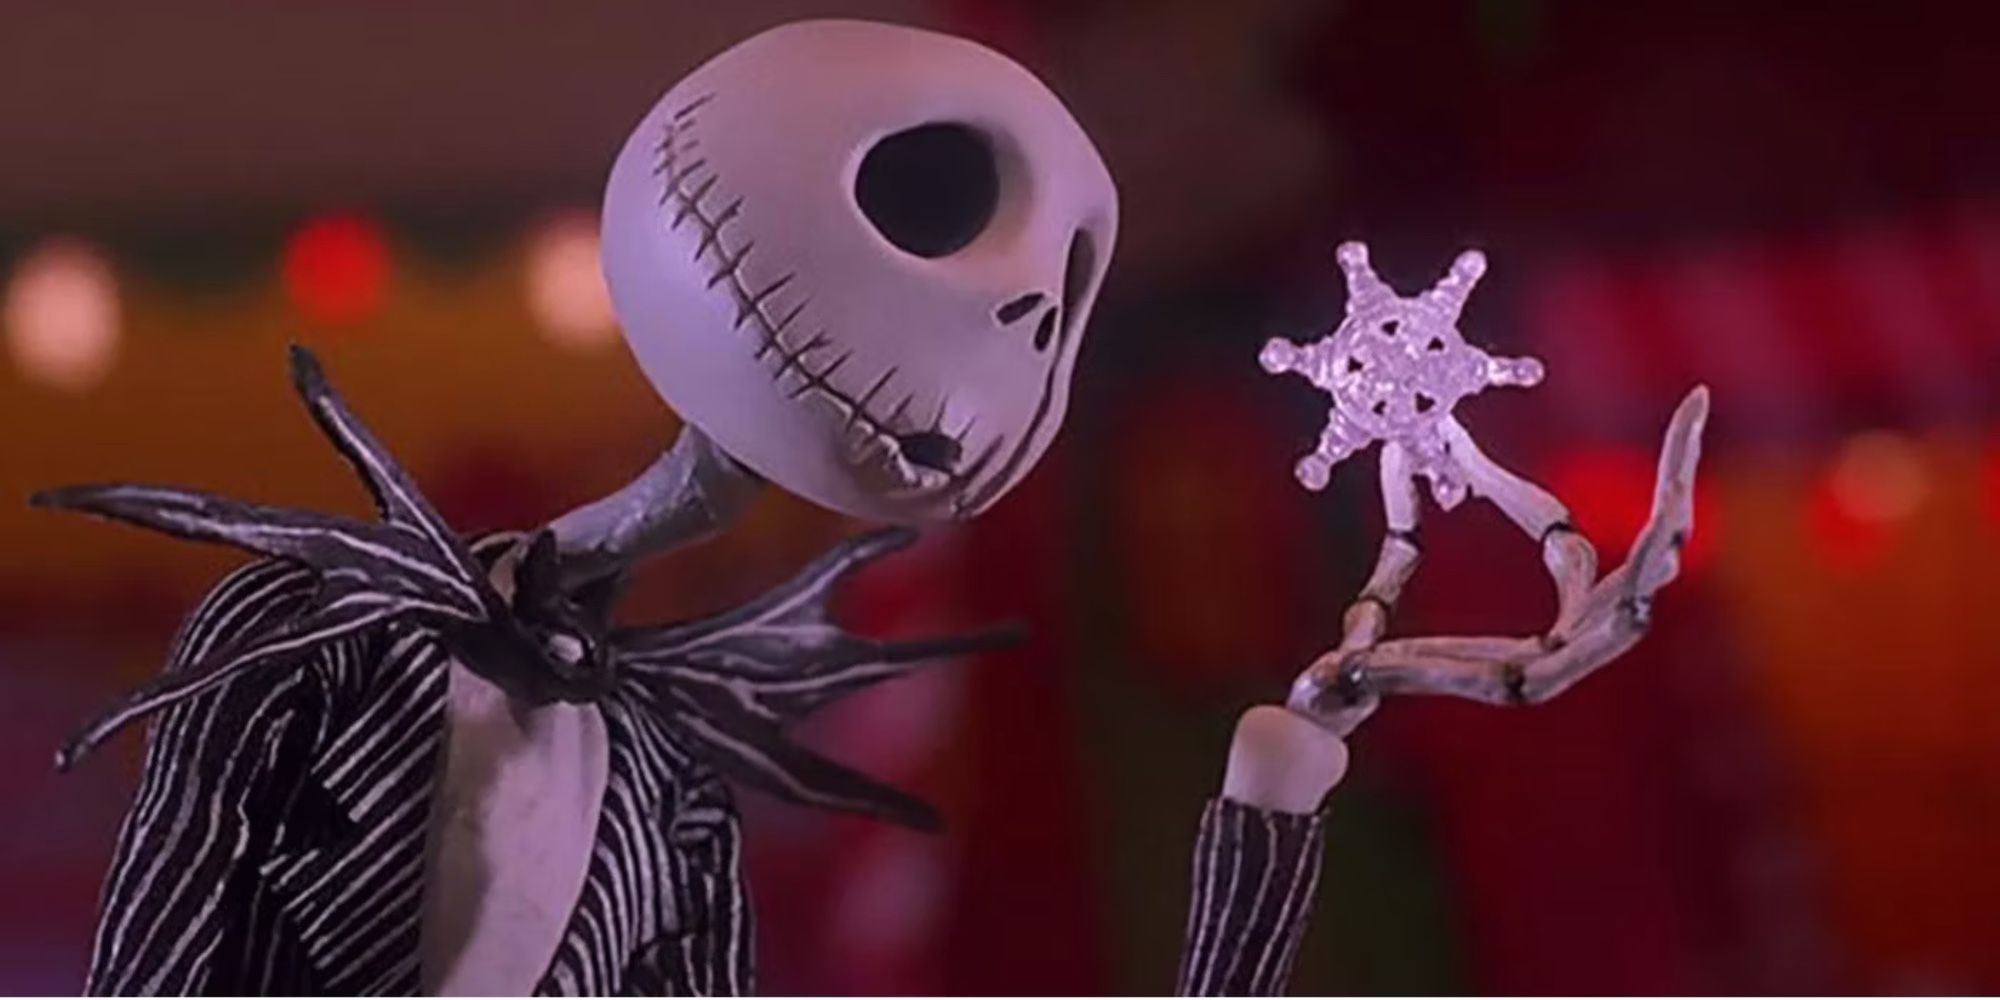 Jack holding a snowflake in The Nightmare Before Christmas.